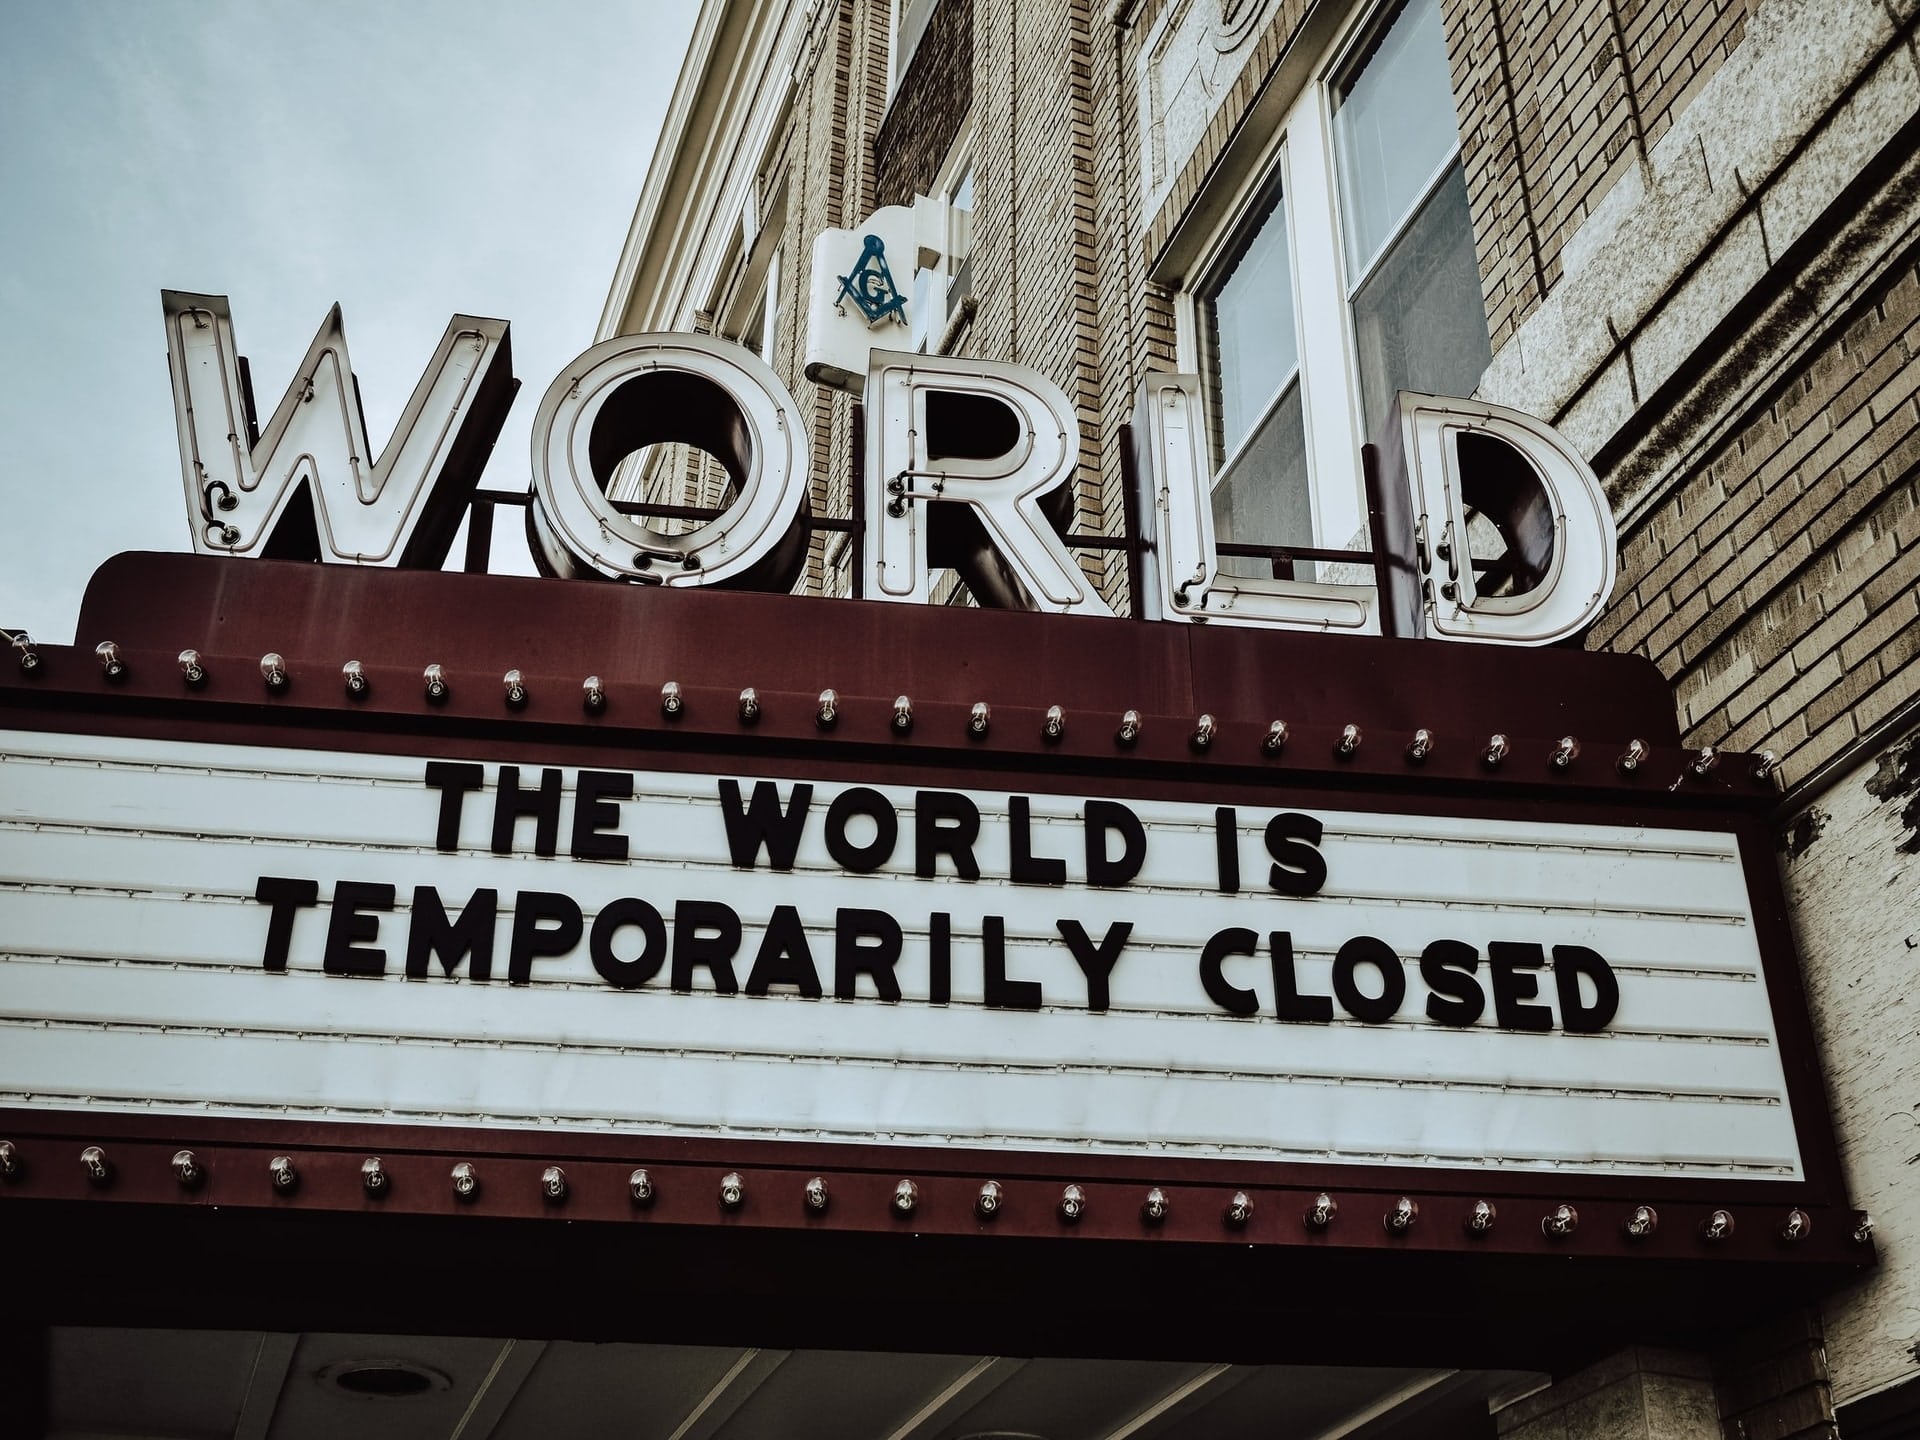 The World is Closed Theatre Poster